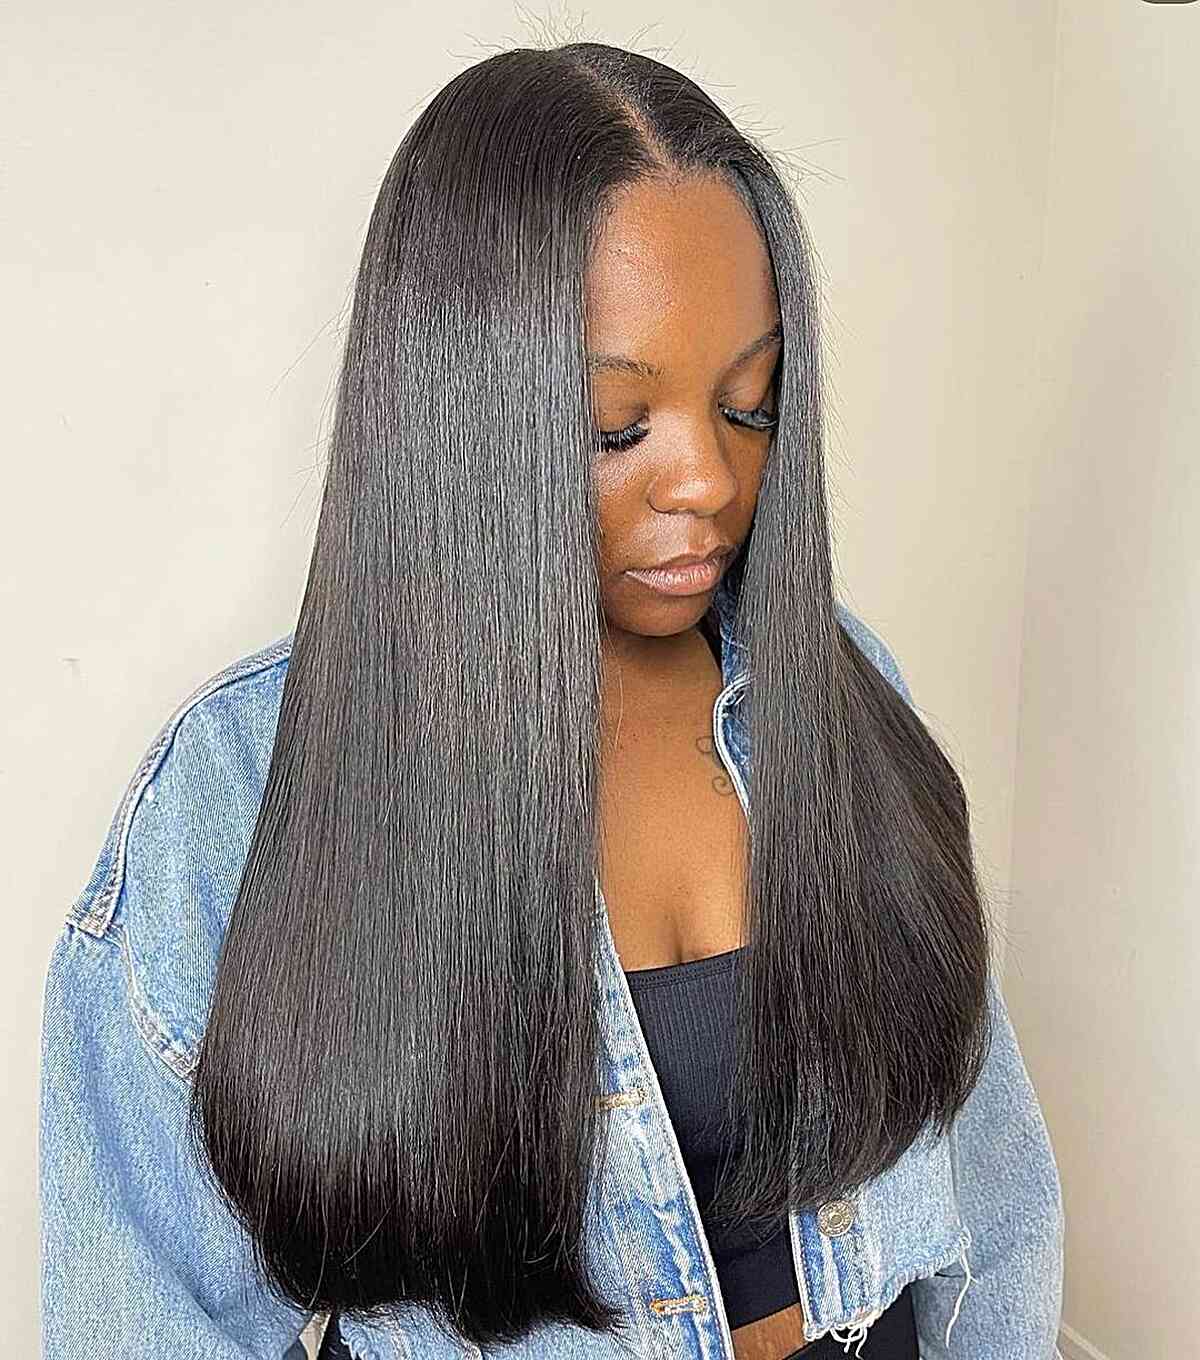 Sewn-in straight hair extensions